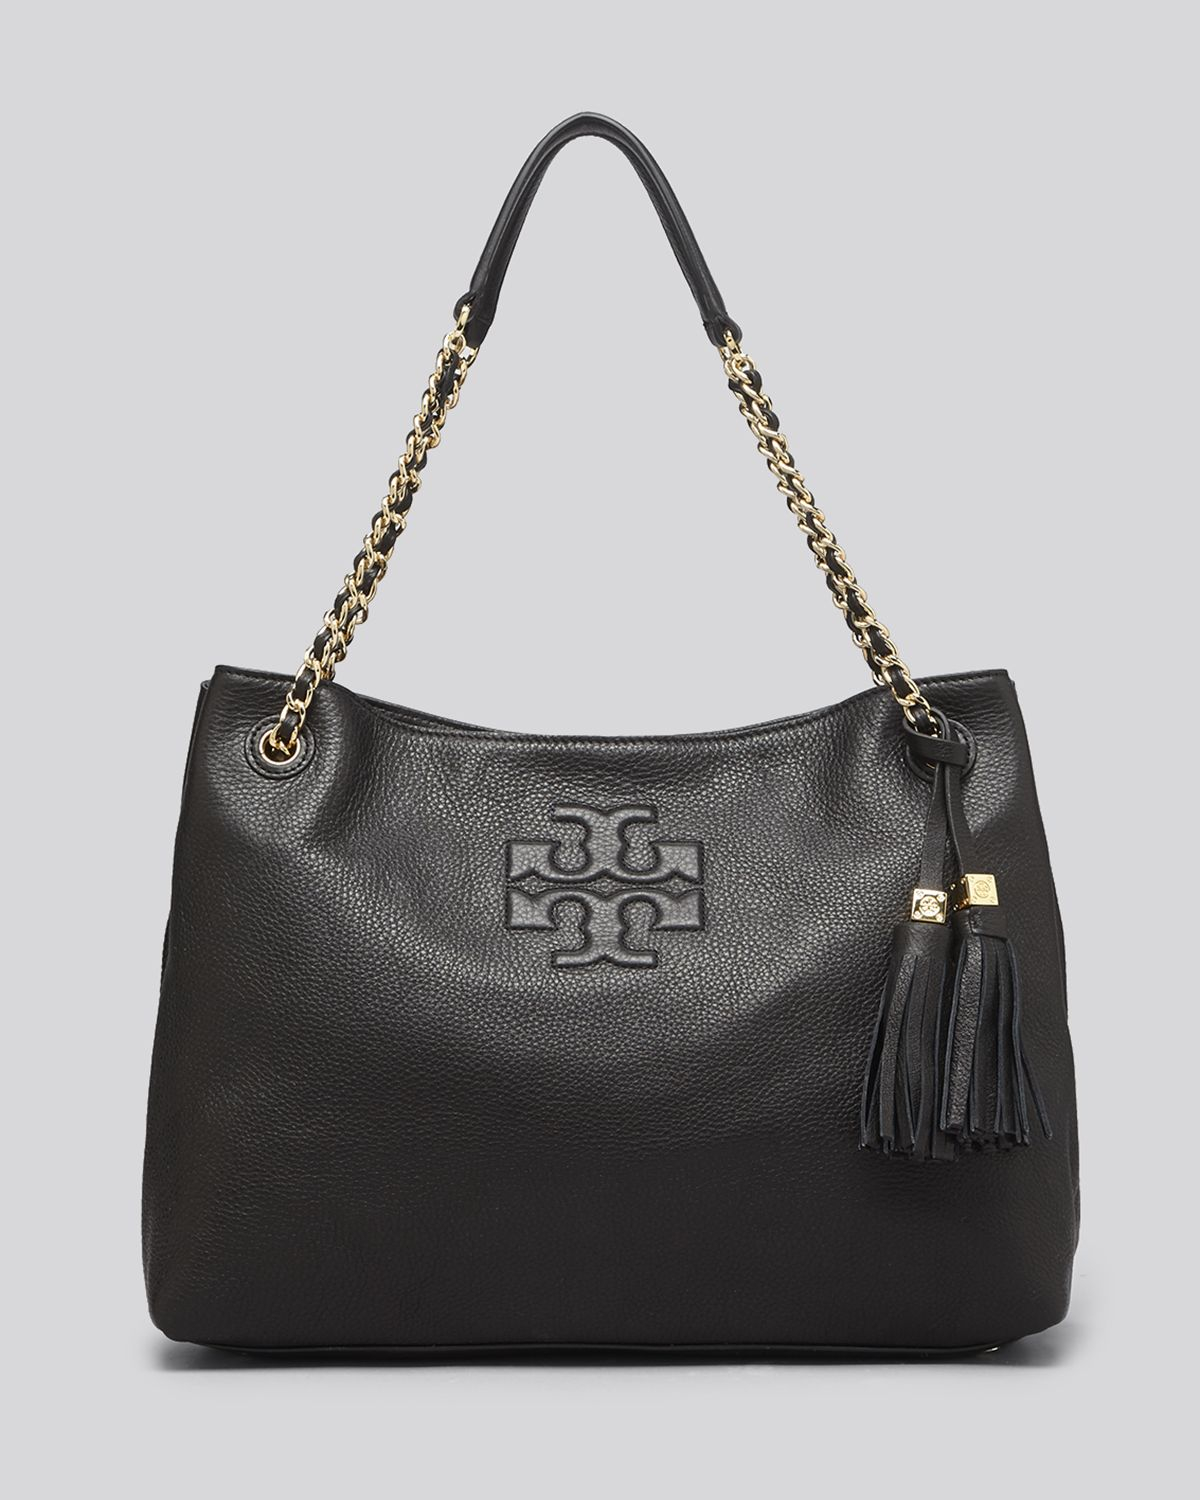 Tory Burch Tote Thea Chain Shoulder Slouchy in Black - Lyst